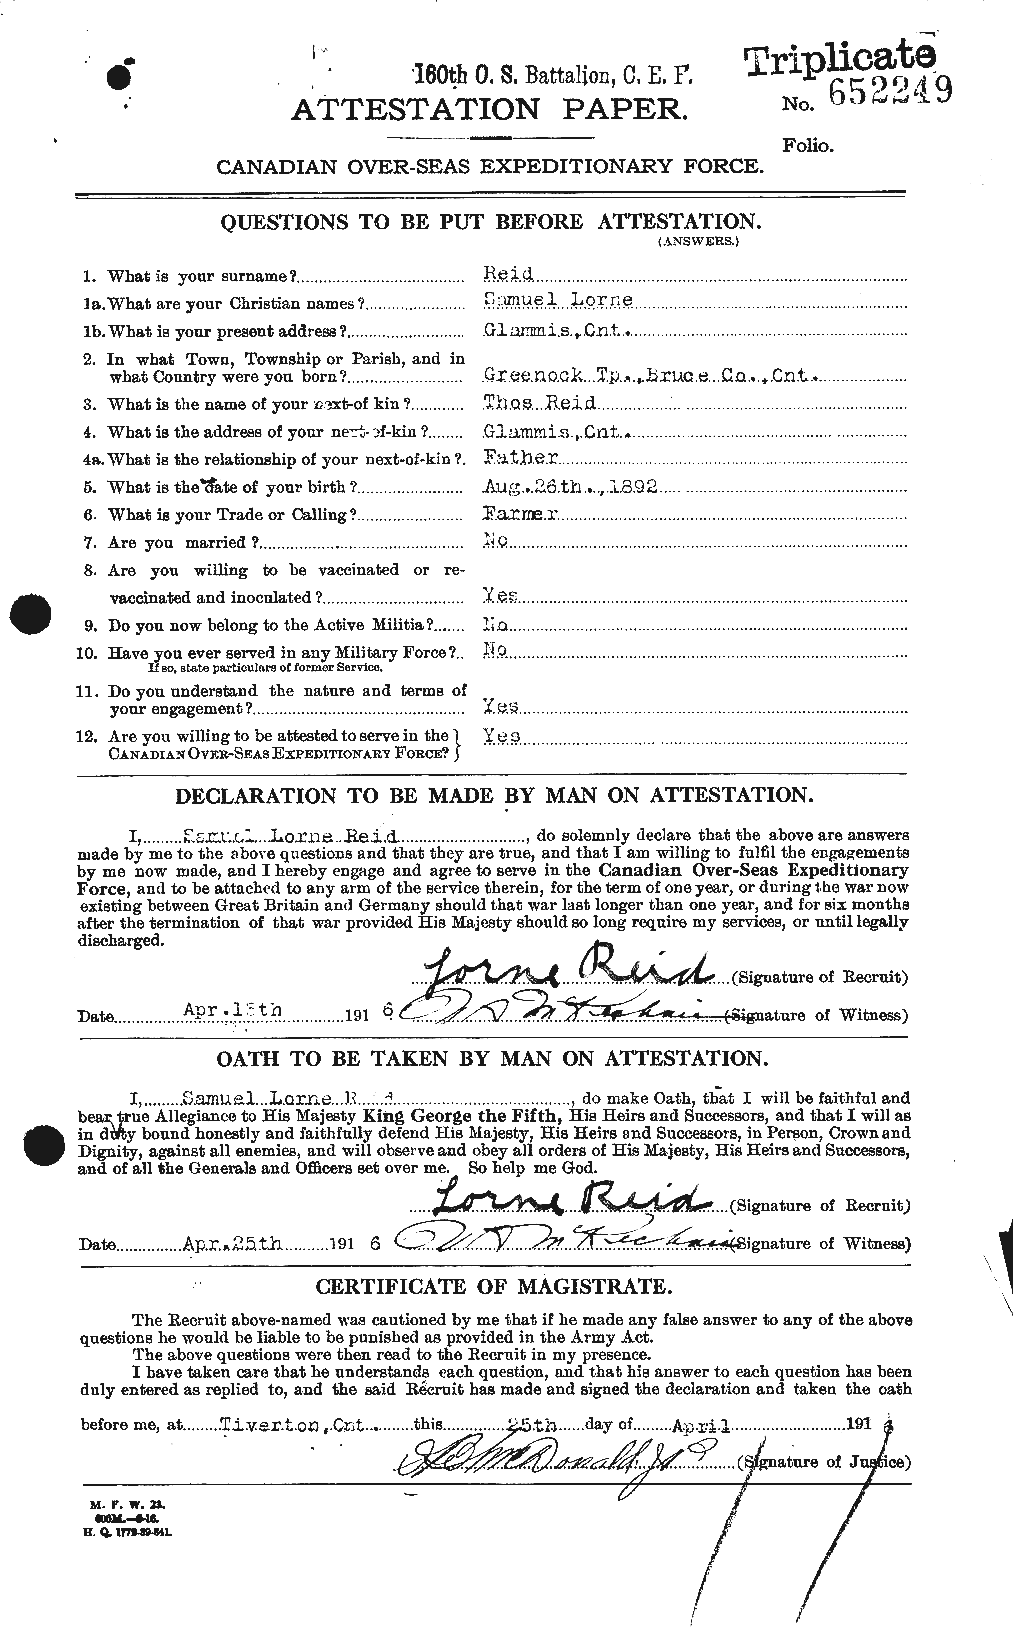 Personnel Records of the First World War - CEF 601951a